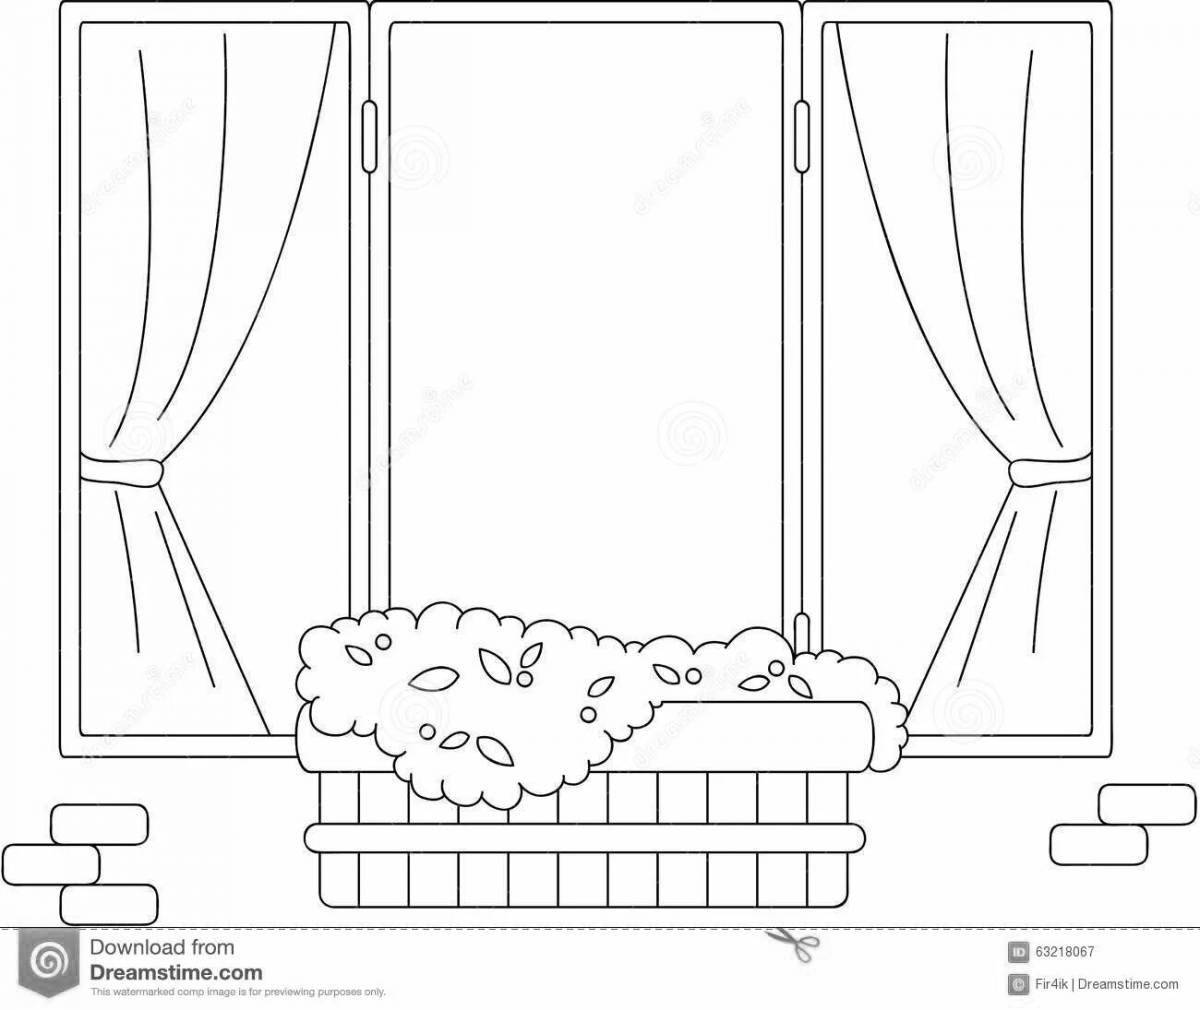 Coloring pages for kids with a colorful and exciting window